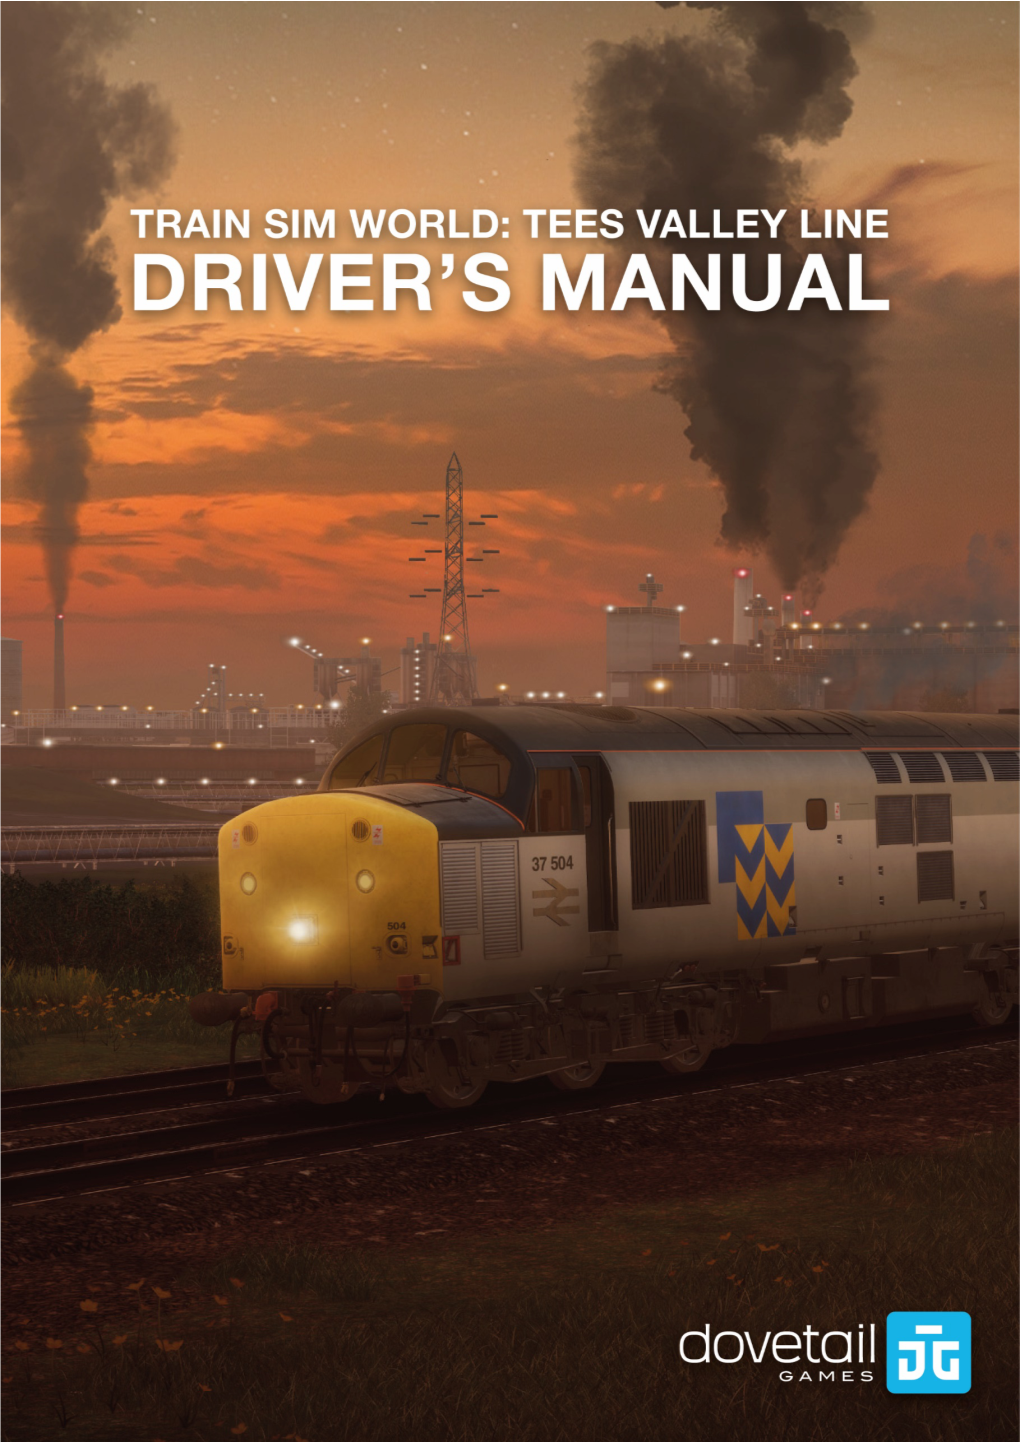 View the Manual